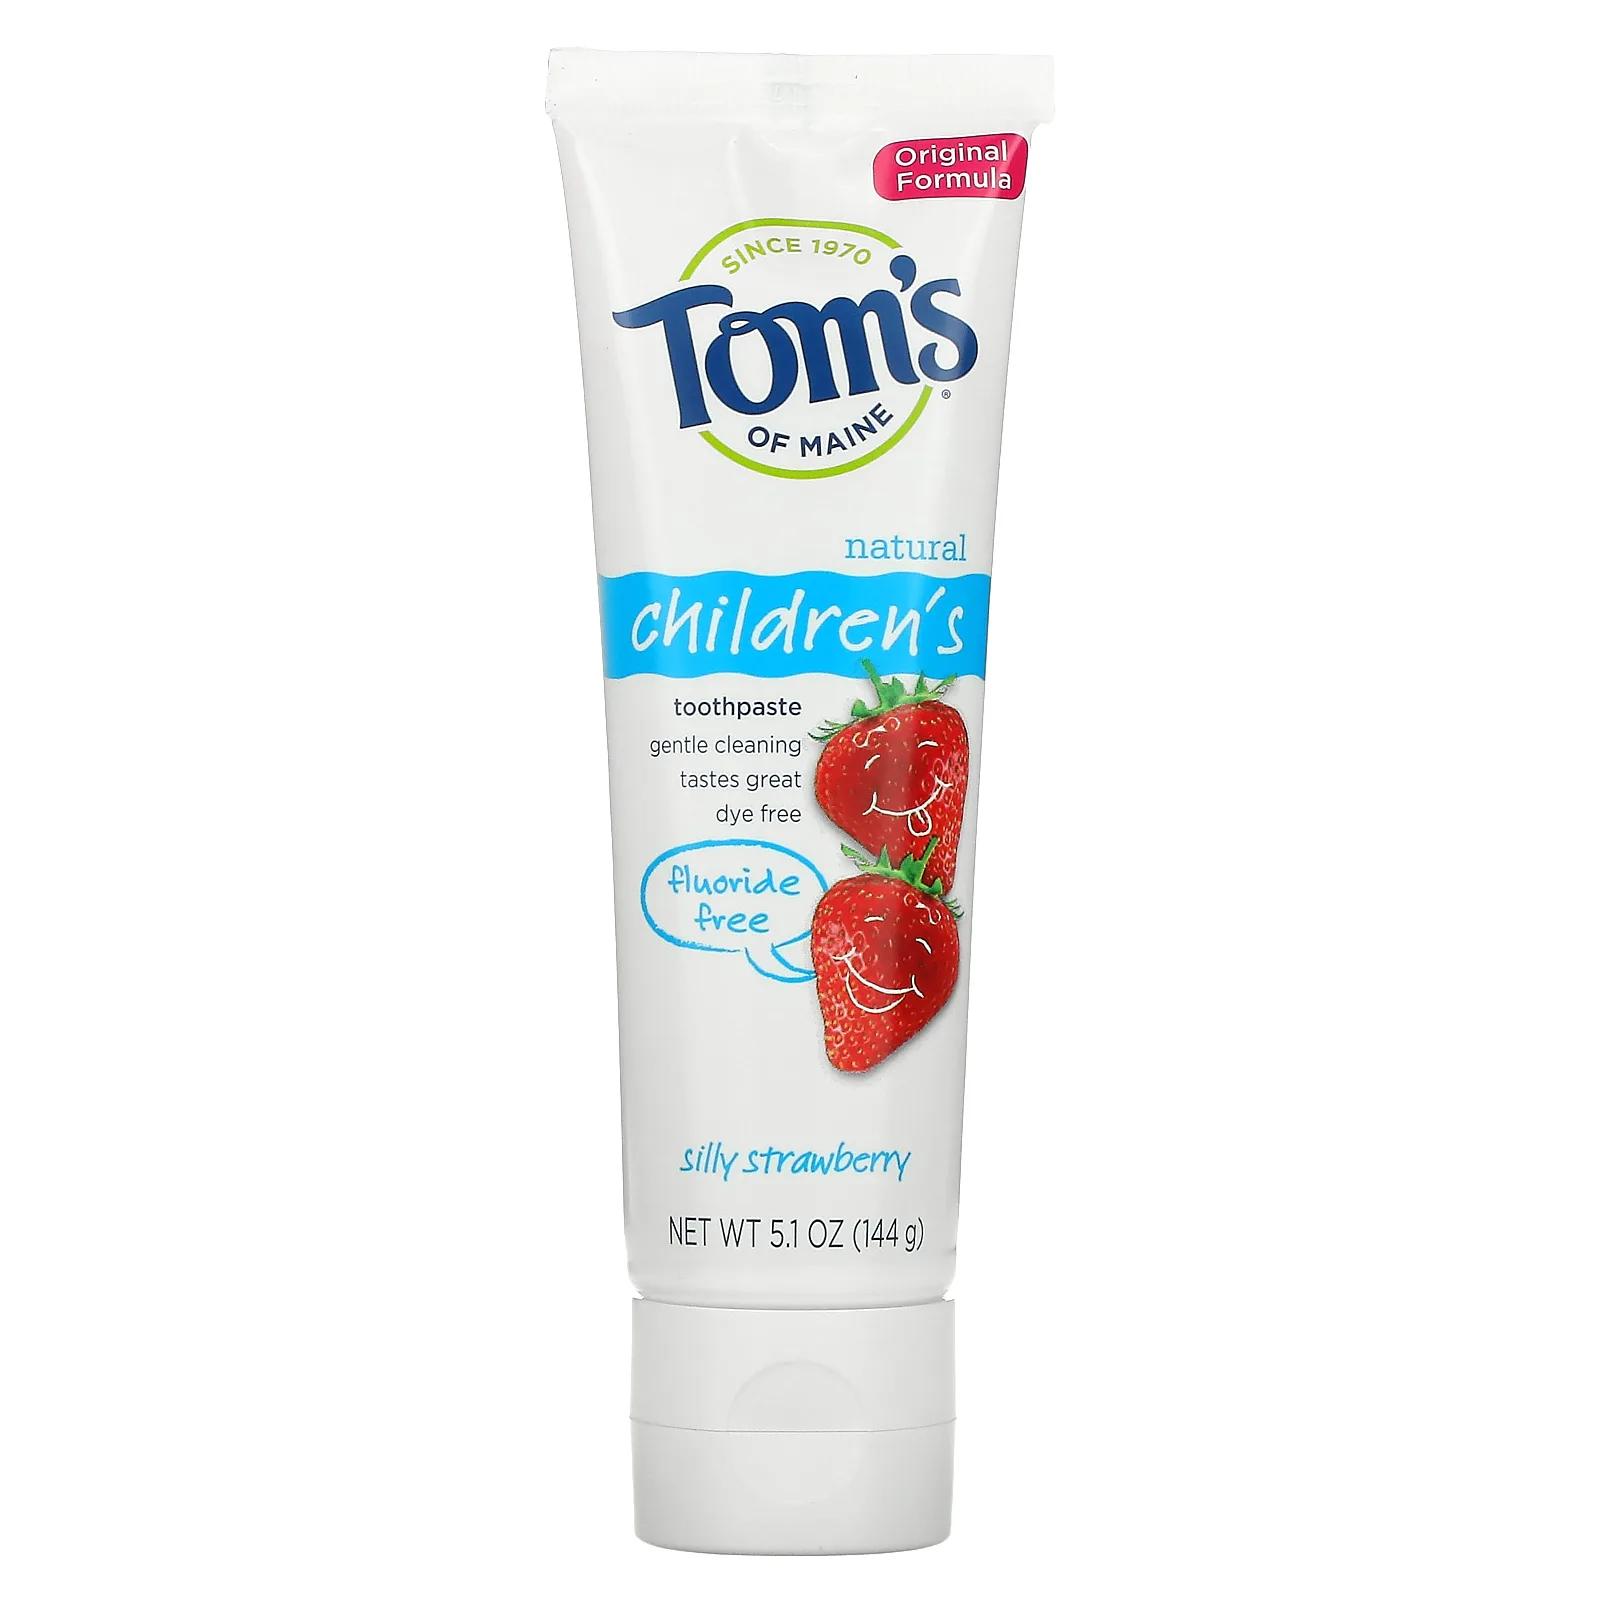 Tom's of Maine Natural Children's Toothpaste Fluoride-Free Silly Strawberry 5.1 oz (144 g) дезодорант tom s of maine без запаха